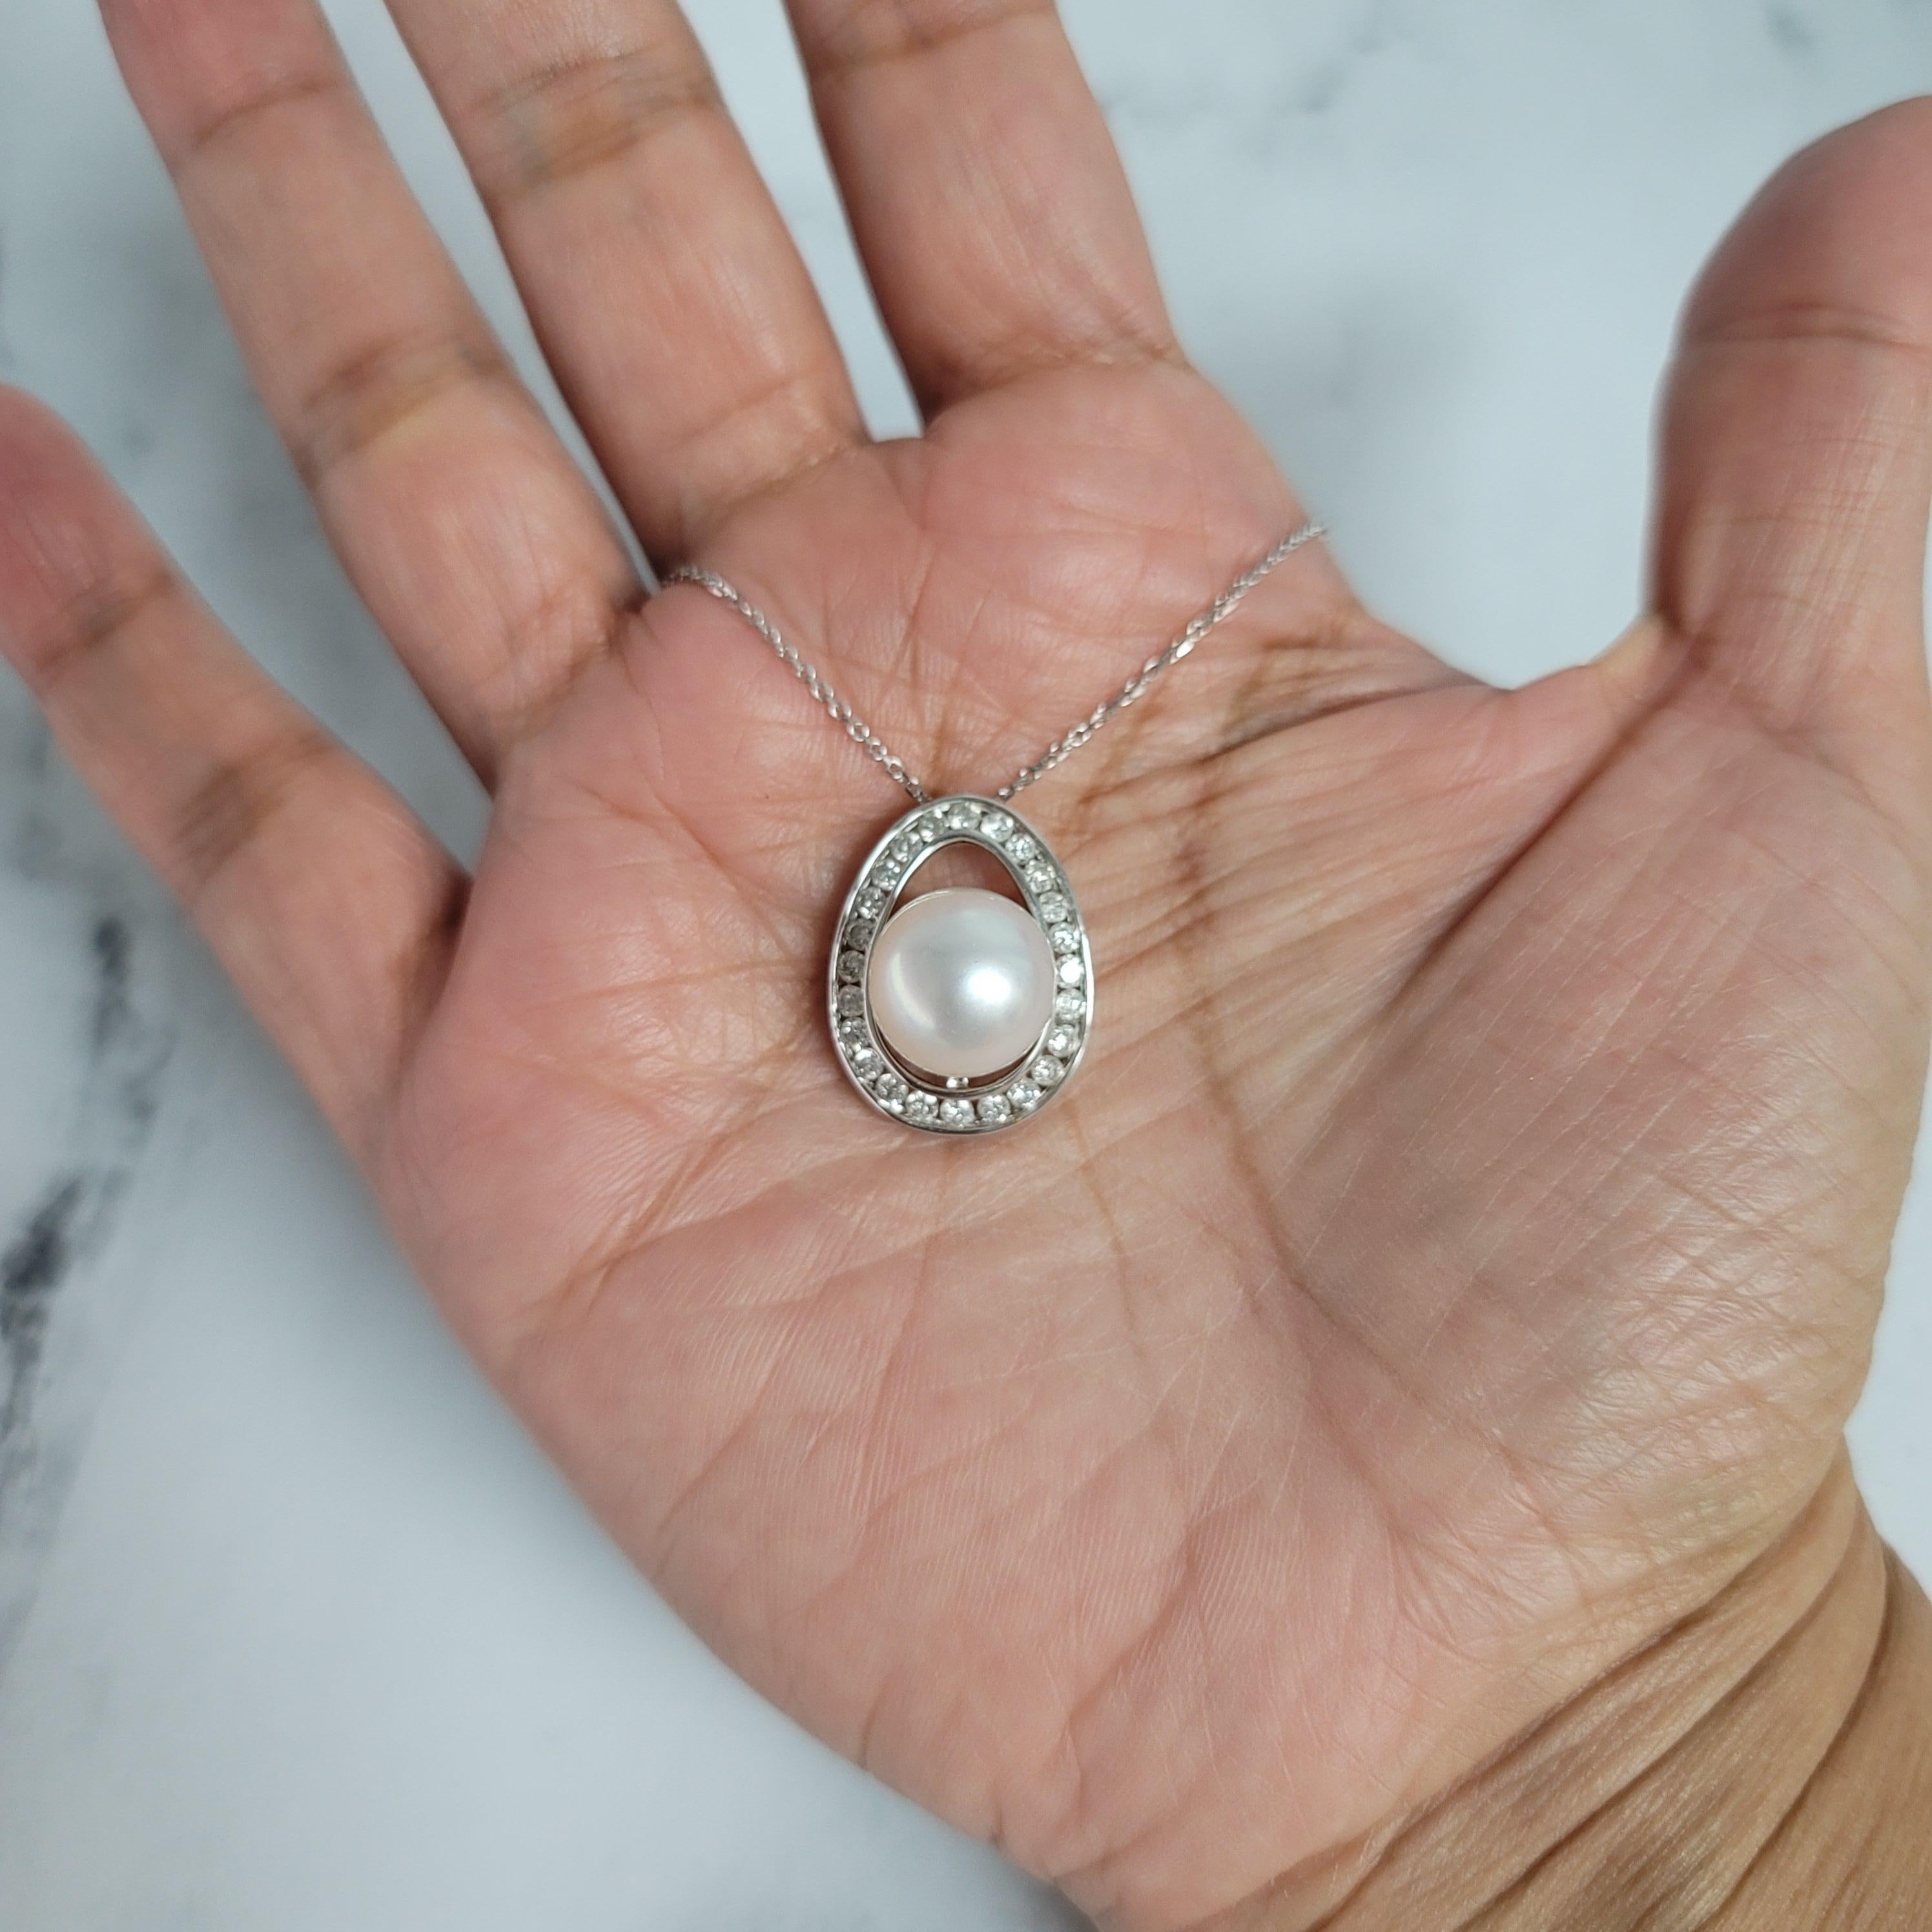 ♥ Product Summary ♥

Main Stone: Freshwater Pearl & Diamonds
Approx. Diamond Carat Weight: .90cttw 
Diamond Color: G/H
Diamond Clarity: SI1/SI2
Pearl Size: 12mm
Metal: 18k White Gold 
Stone Cut: Round
Dimensions: 22mm x 17mm
Chain: 1.1mm 14k White